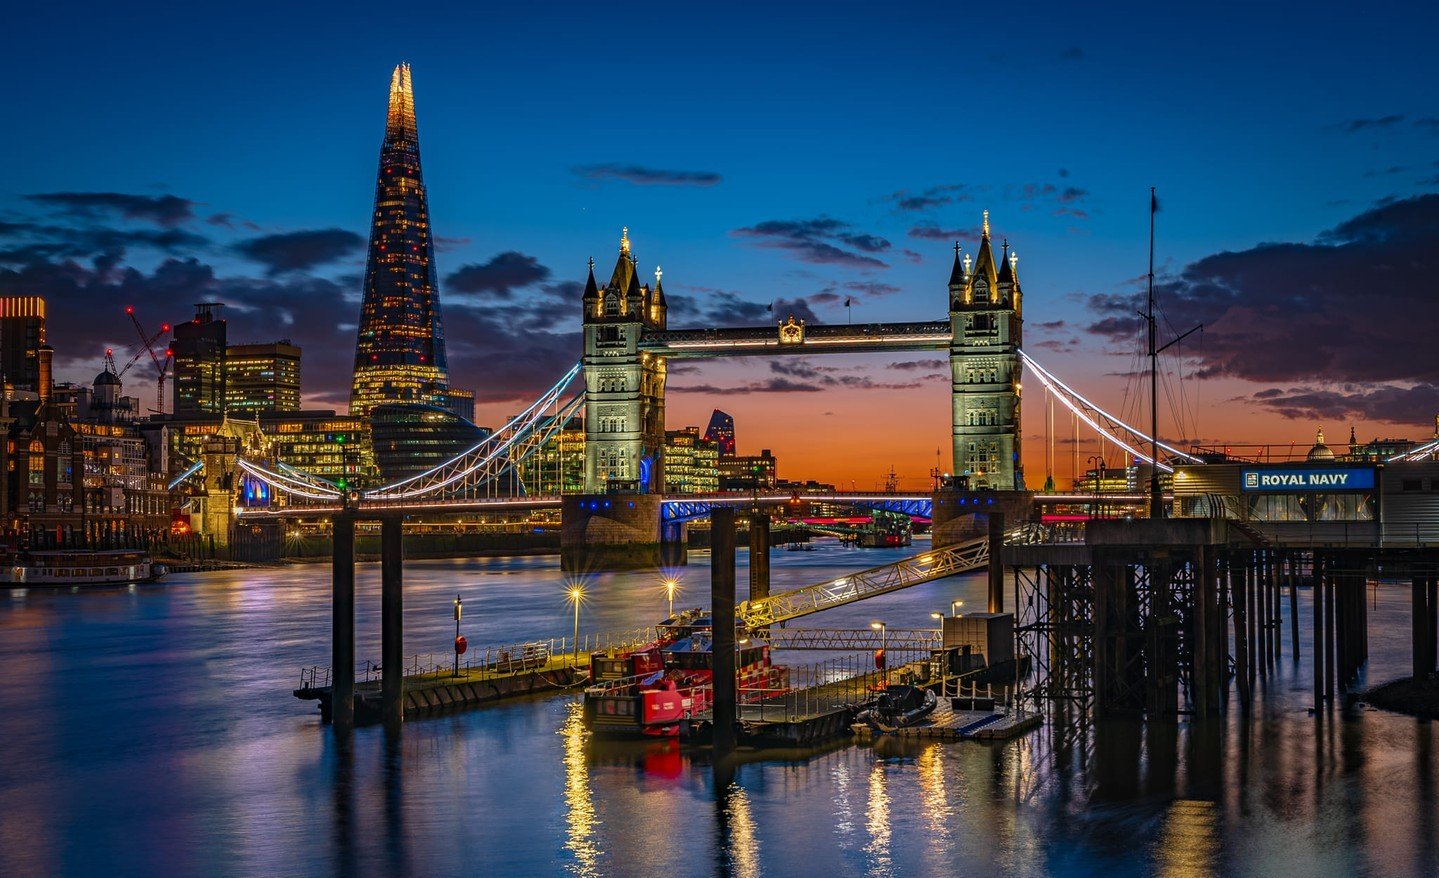 Member Andy Soar @andysoar68 has captured ALL of the colours of London in this fab #sunset shot! 🌉

f/11,  ISO 100, 5 shot exposure bracketed.

#urbanlandscape #urban #london #thames #riverside #river #sunset #twilight #learnphotography #photography